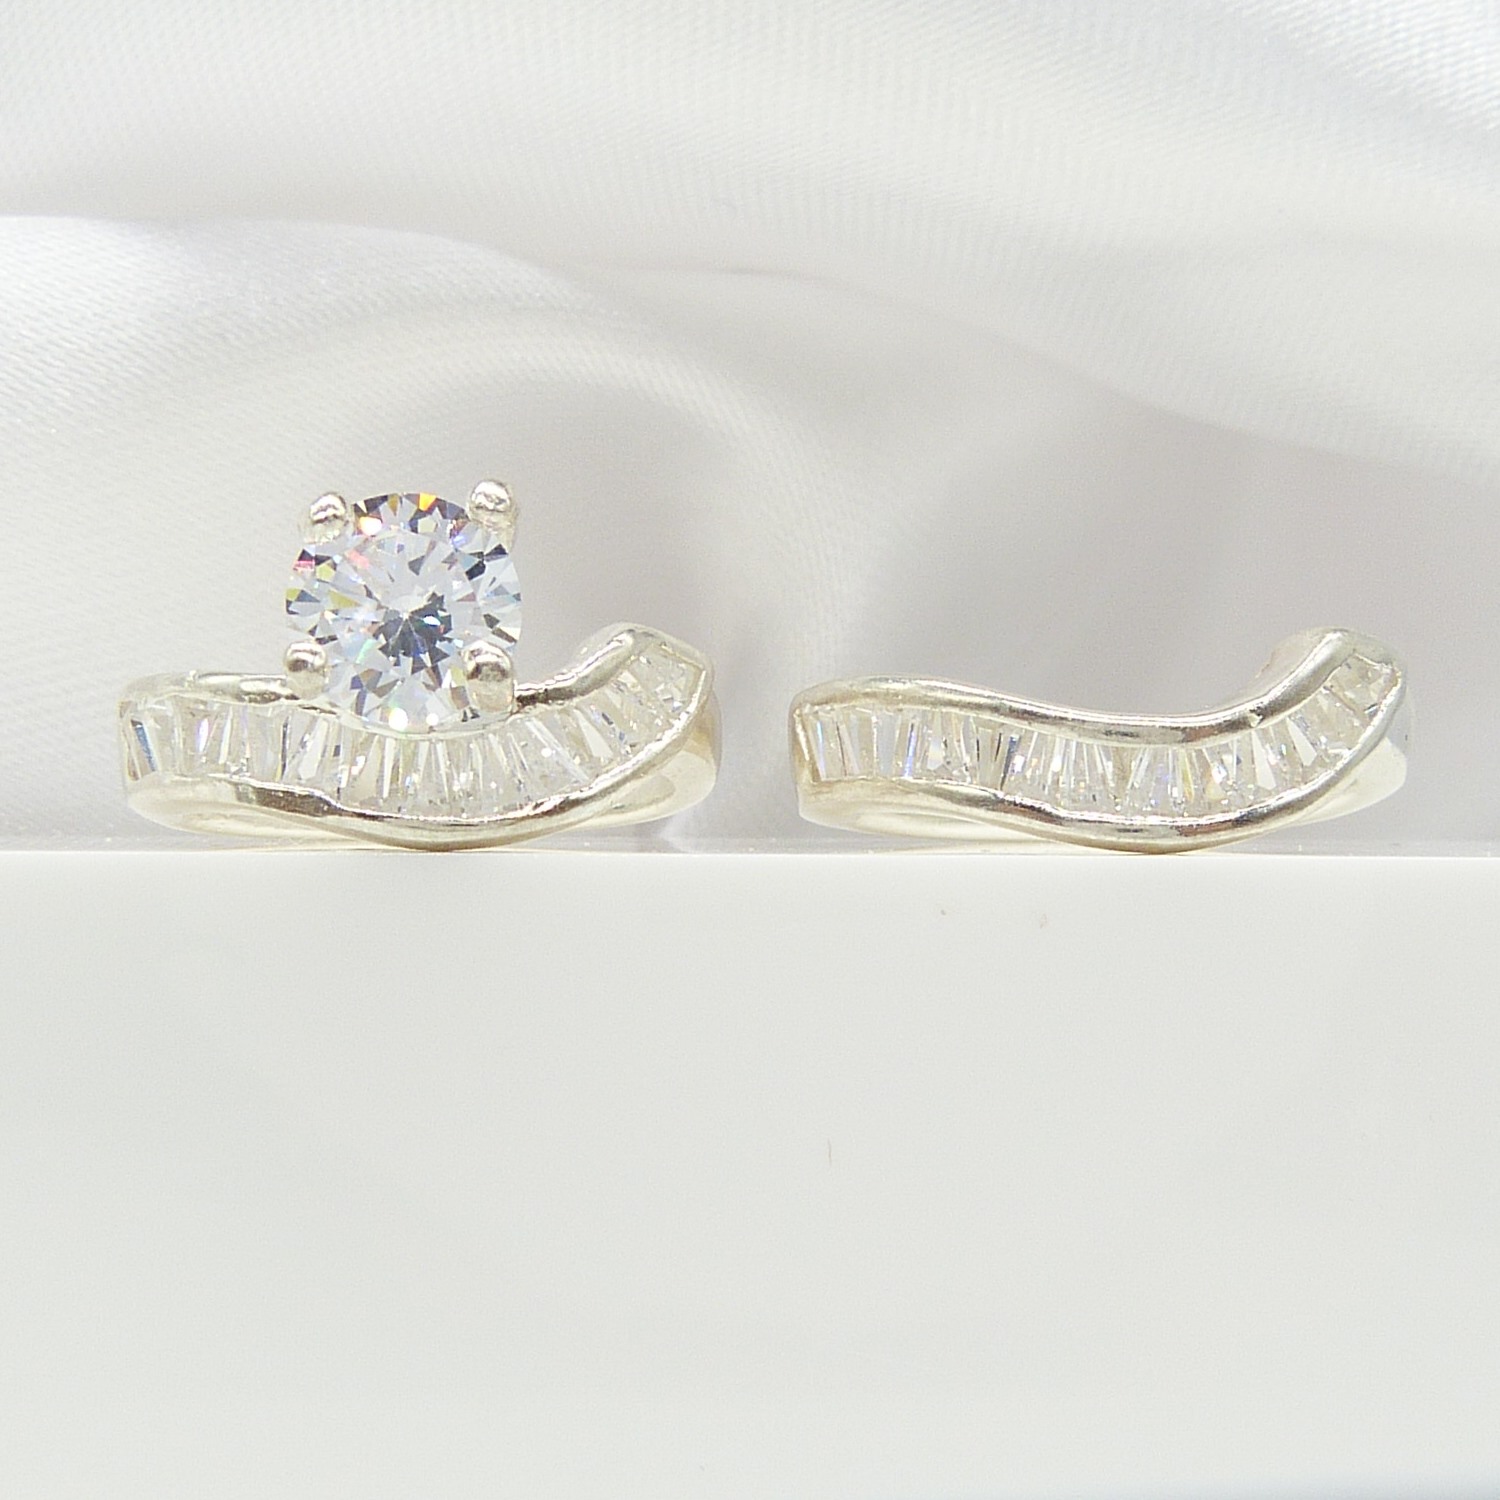 Two part cubic zirconia-set silver wave-style dress ring - Image 5 of 7